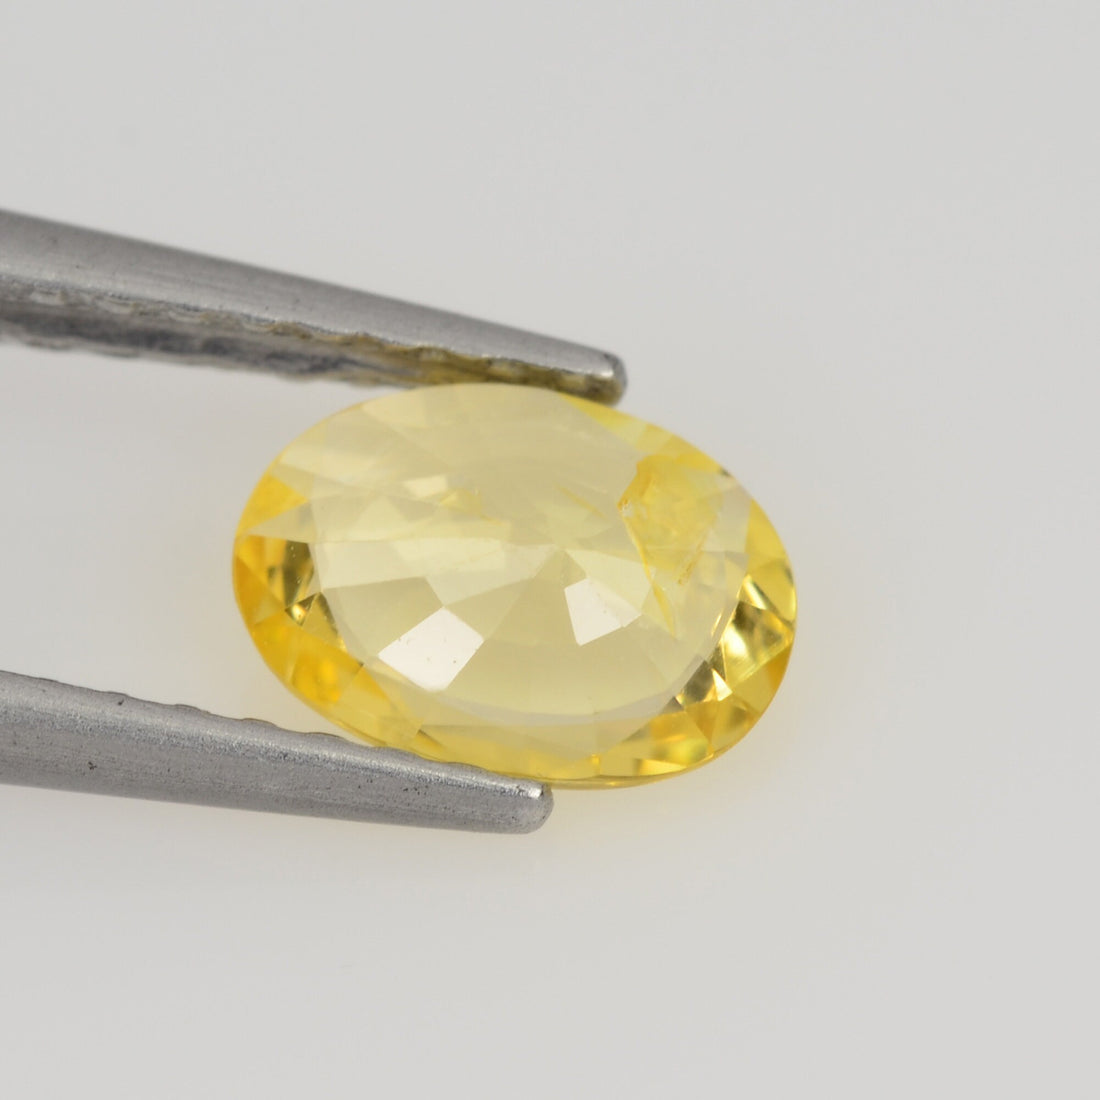 0.62 cts Natural Yellow Sapphire Loose Gemstone Oval Cut